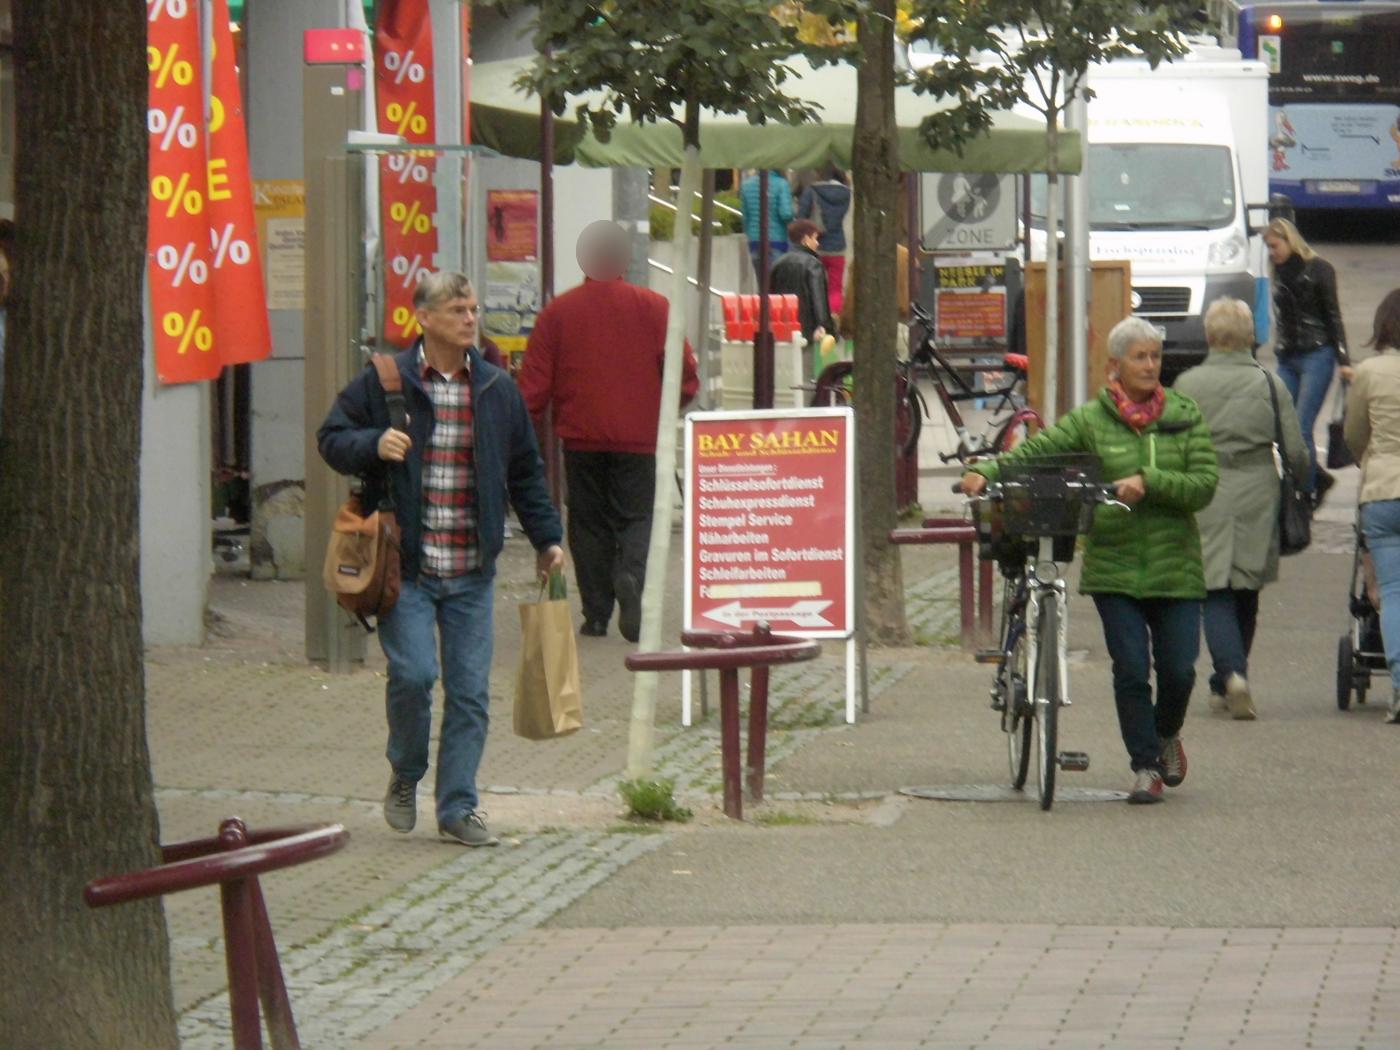 Jehovah's Witnesses in Wiesloch are in a bad mood